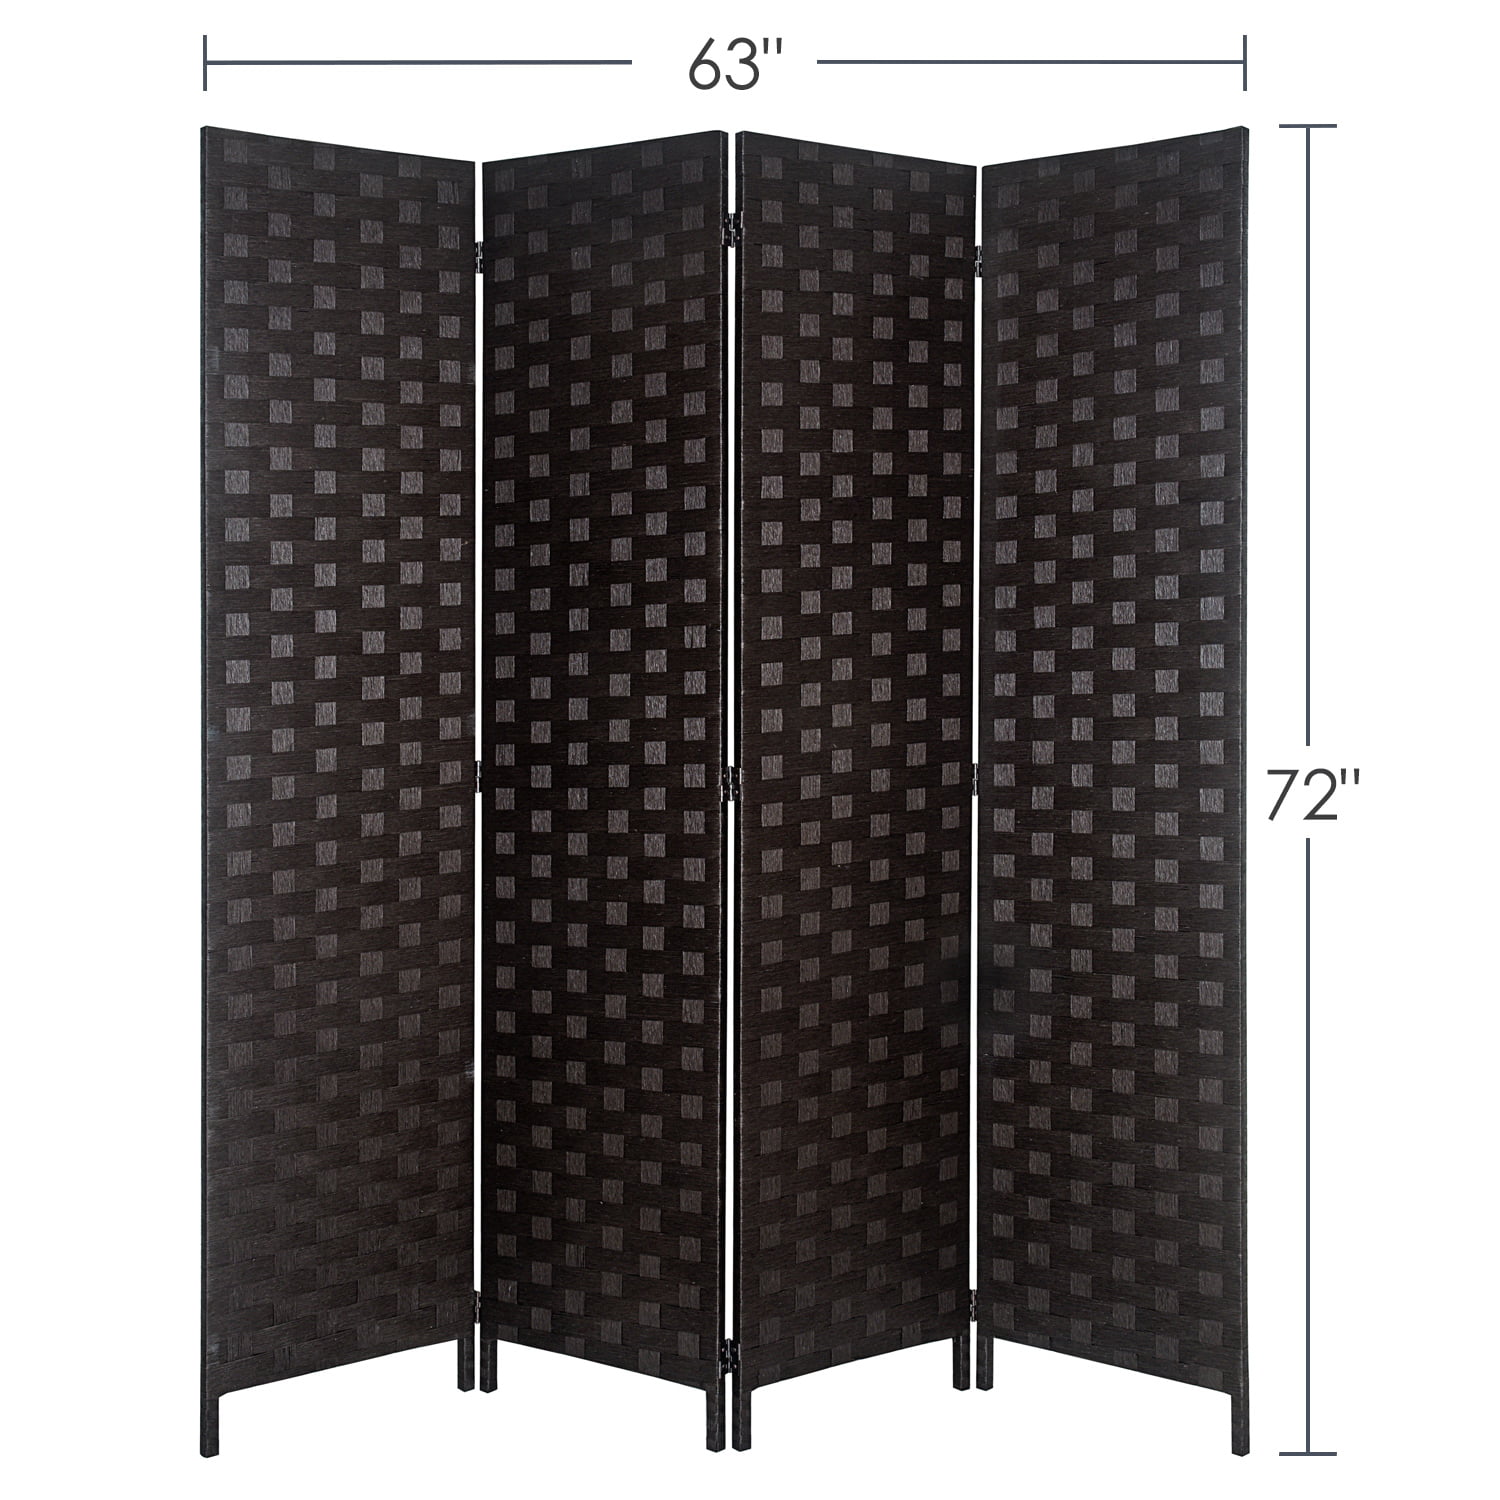 Black Details about   Folding 4 Panel Room Divider Japanese Plum Blossom Home Decor 71" Tall 